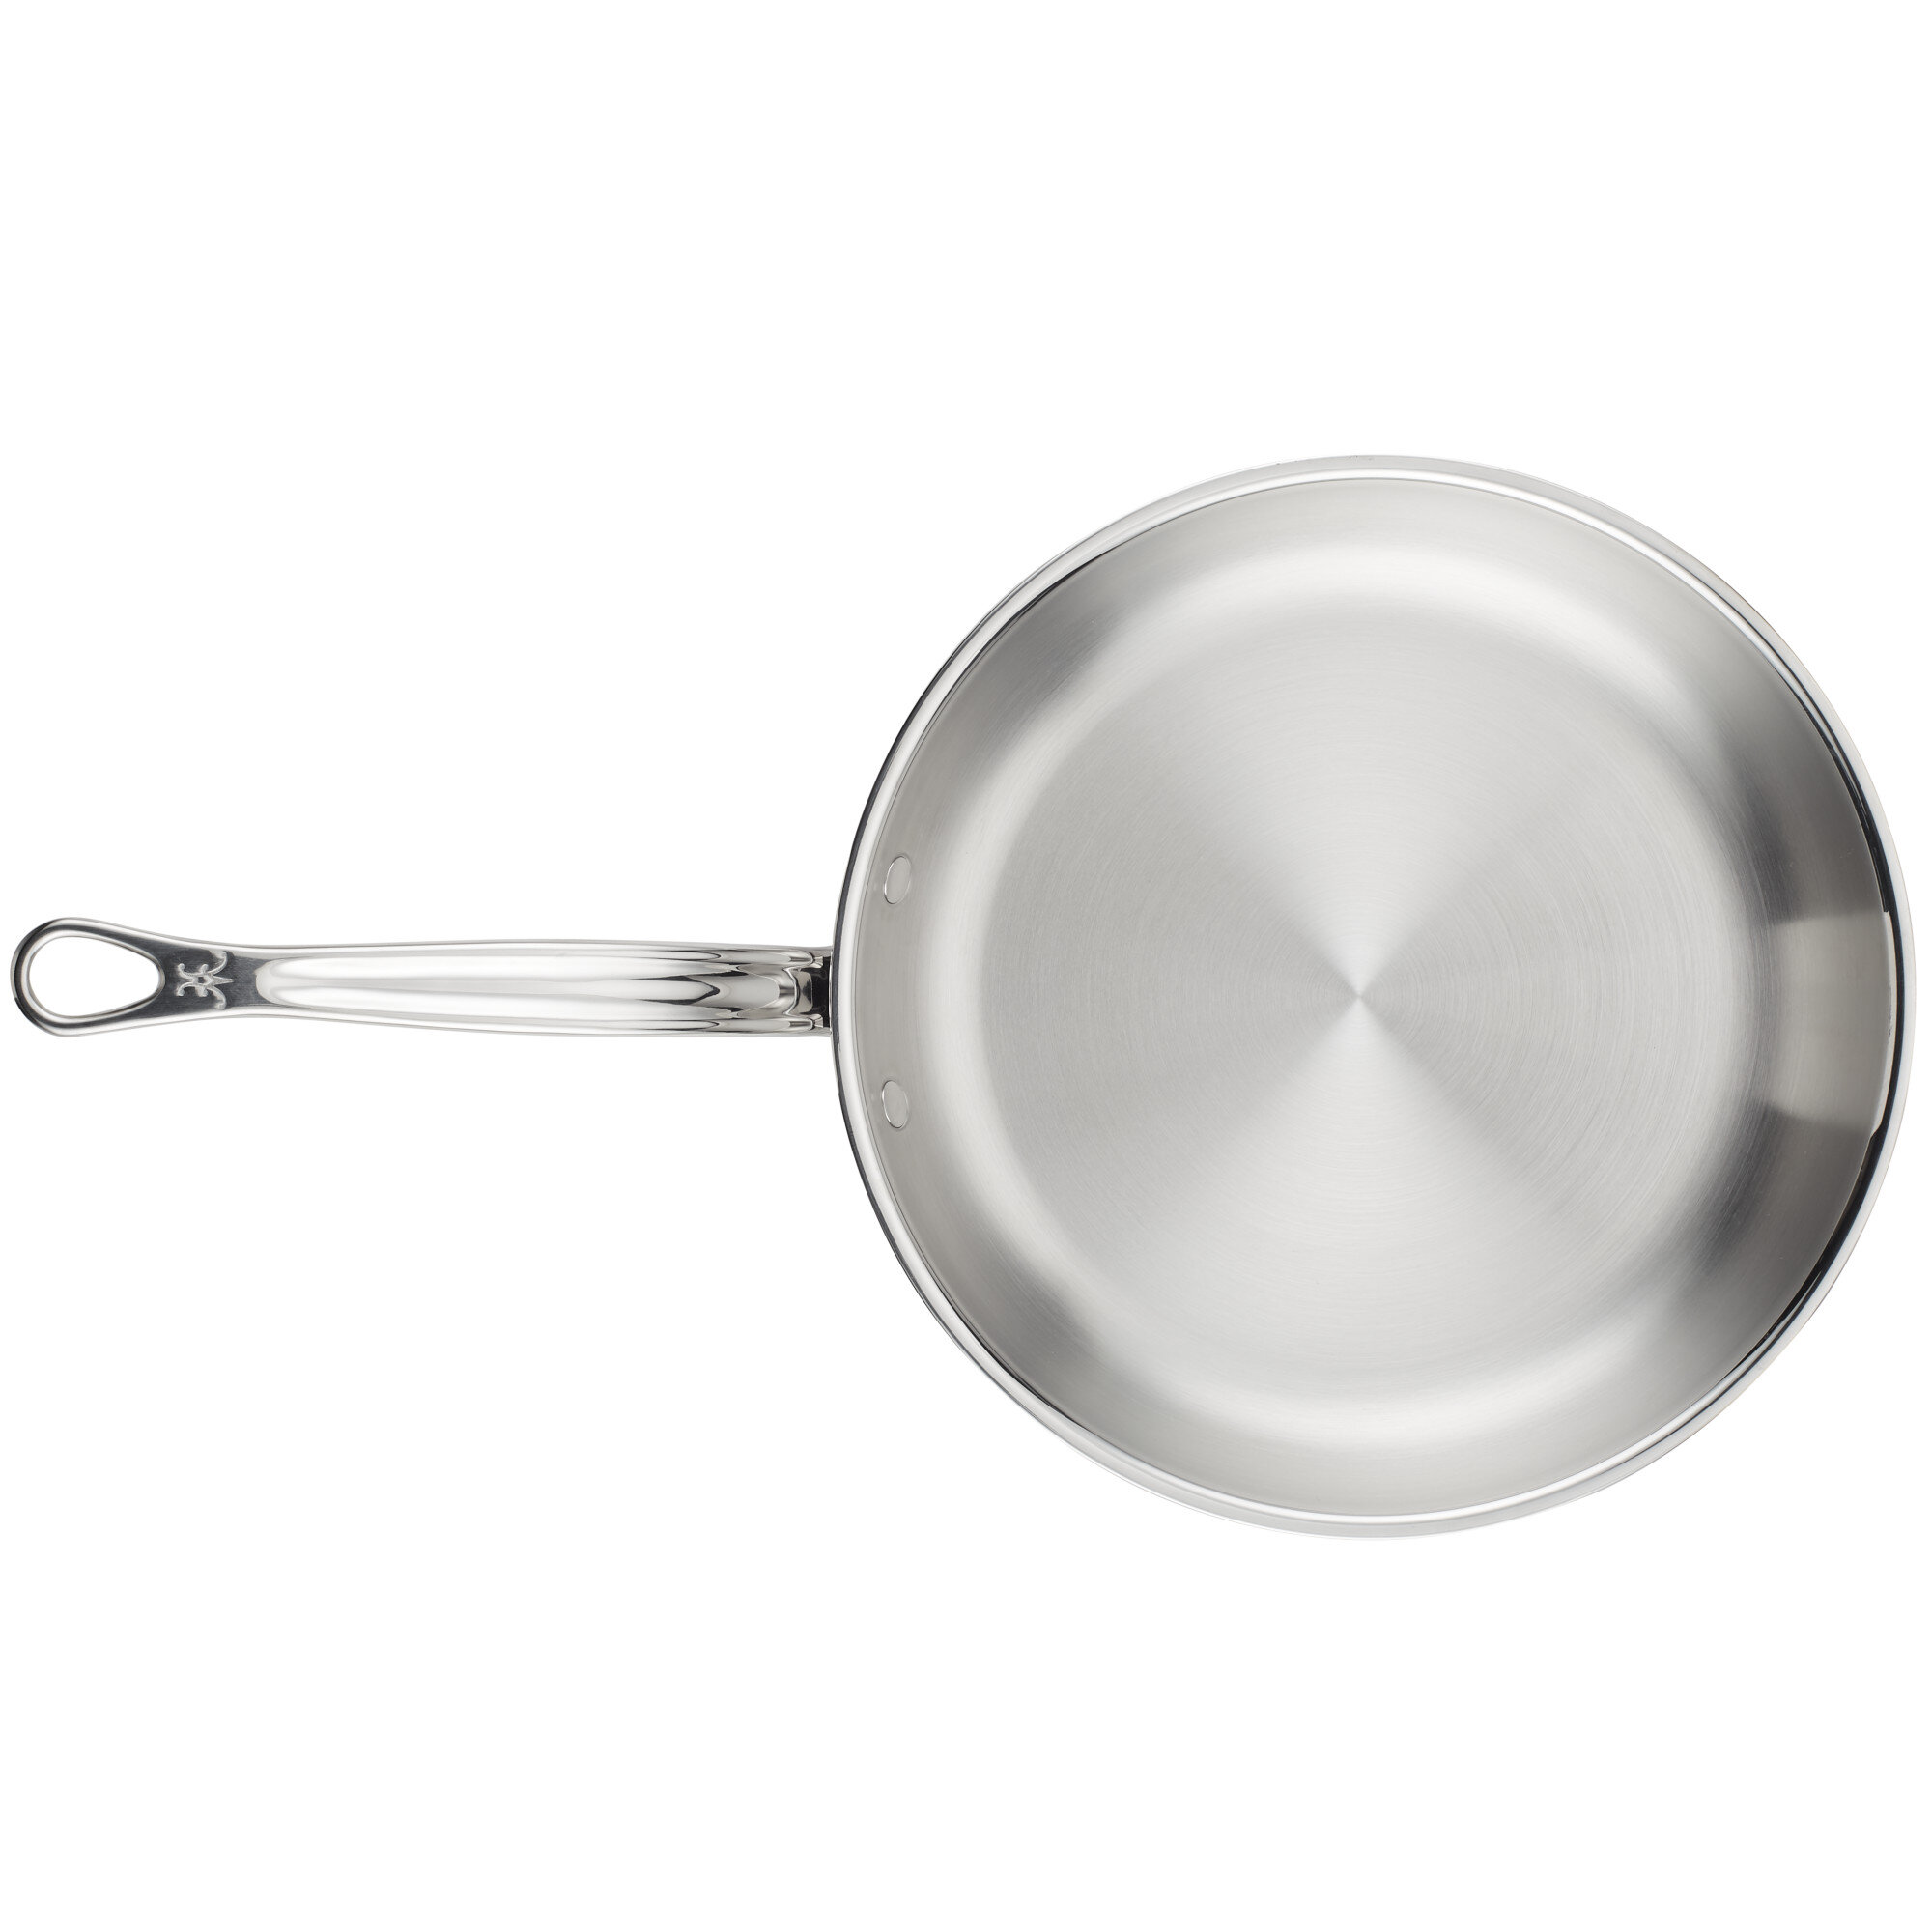 I Spent $280 on a Skillet, Worth it? Hestan Review